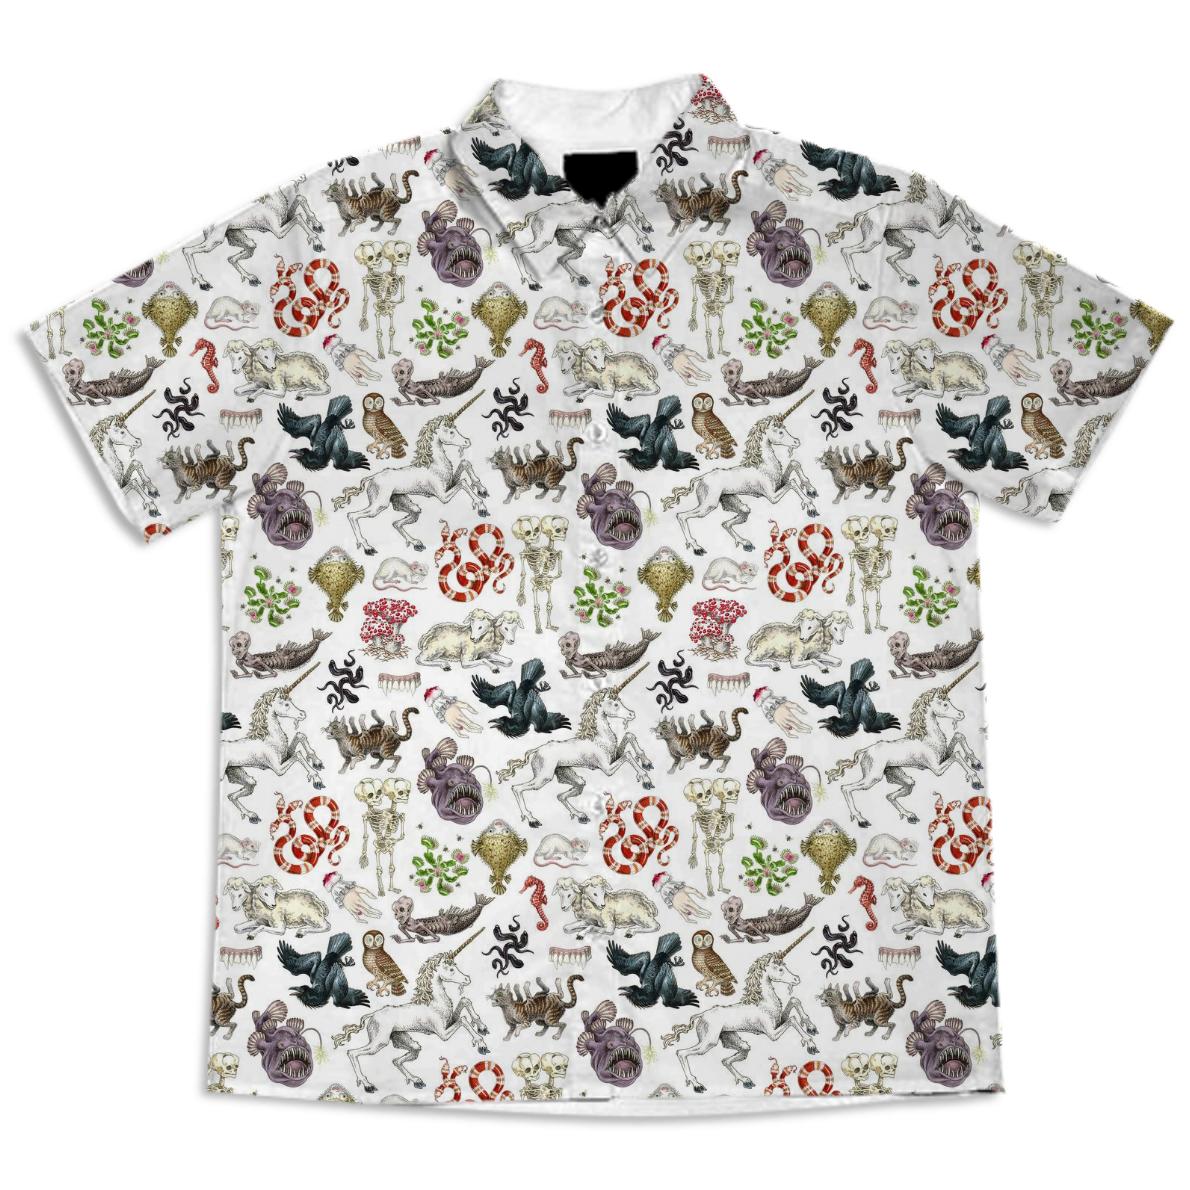 white linen button up shirt with various mythical/ oddity creatures on it such as a unicorn, pufferfish, owl, raven, three-headed snake, Venus fly trap, and two-headed lamb 